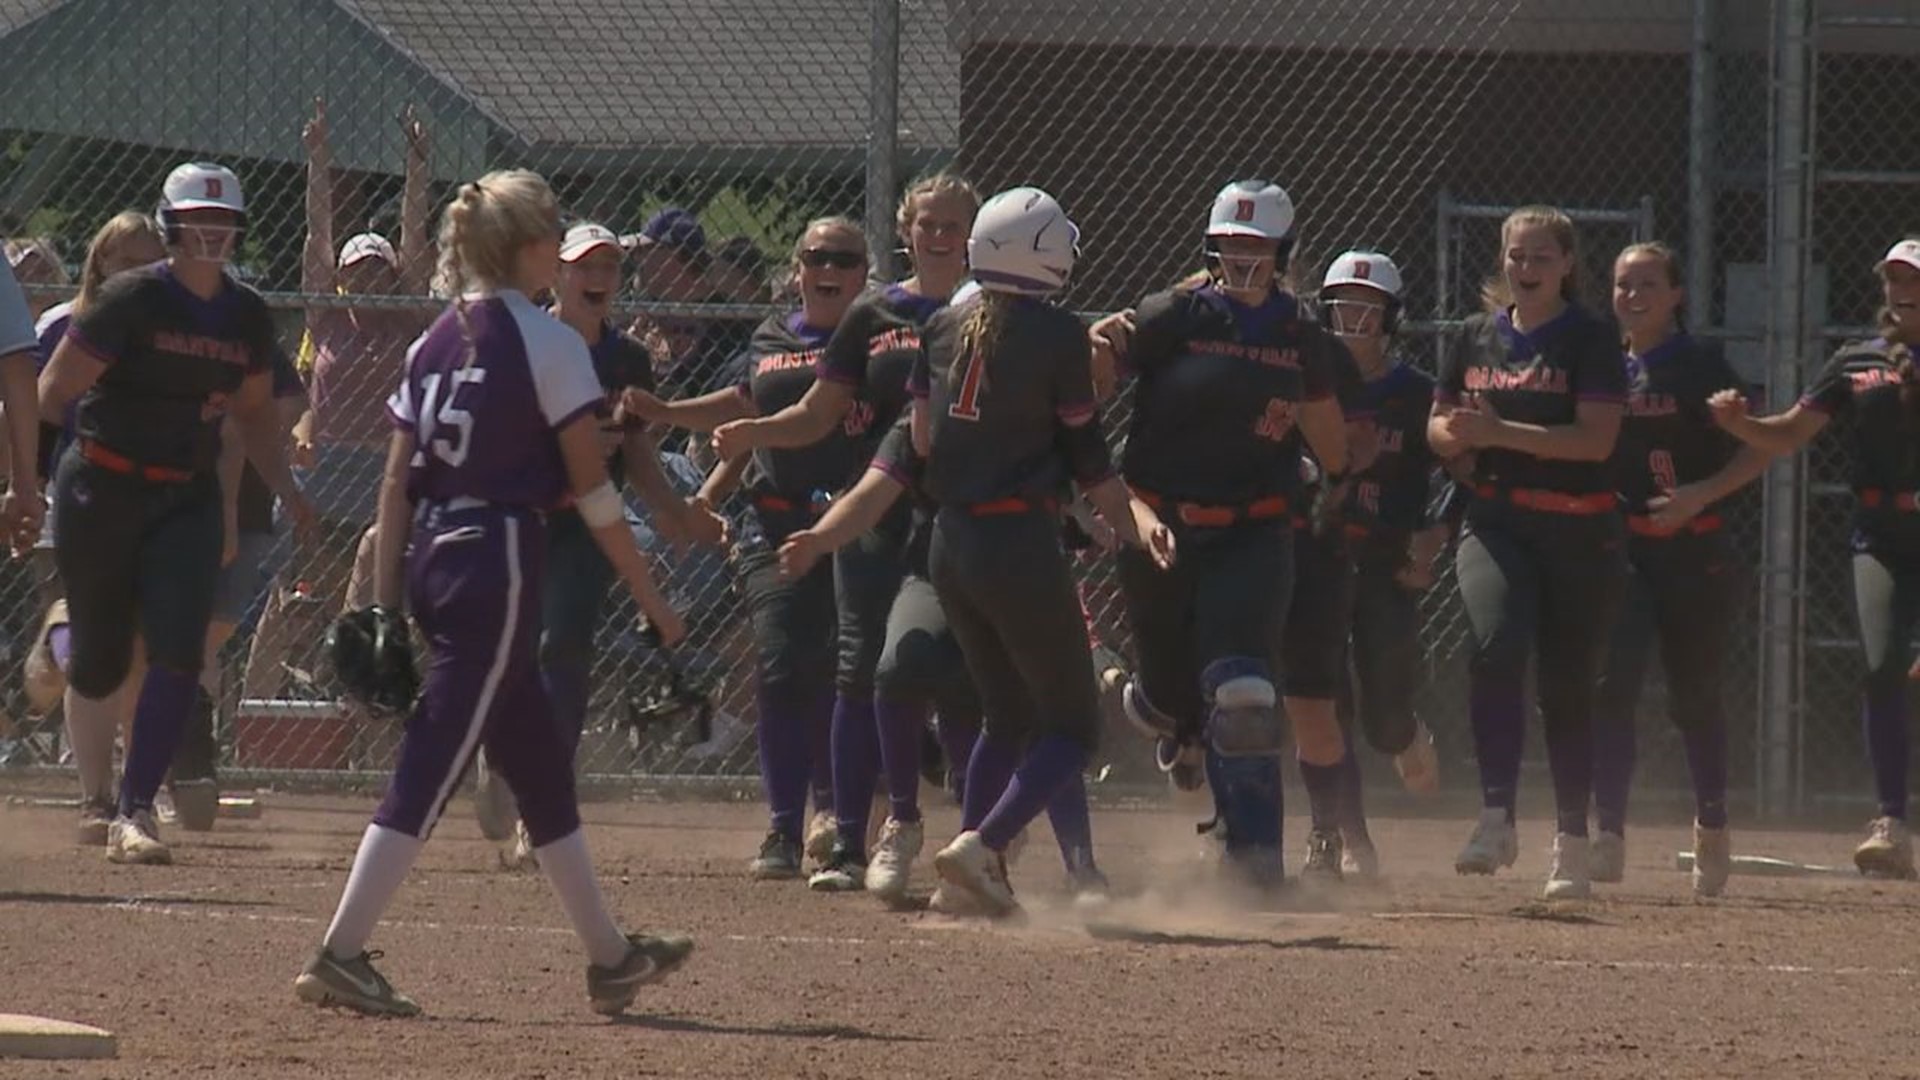 Danville Beat Shamokin 3-2 in 9 innings in the District IV Class 4A Championship